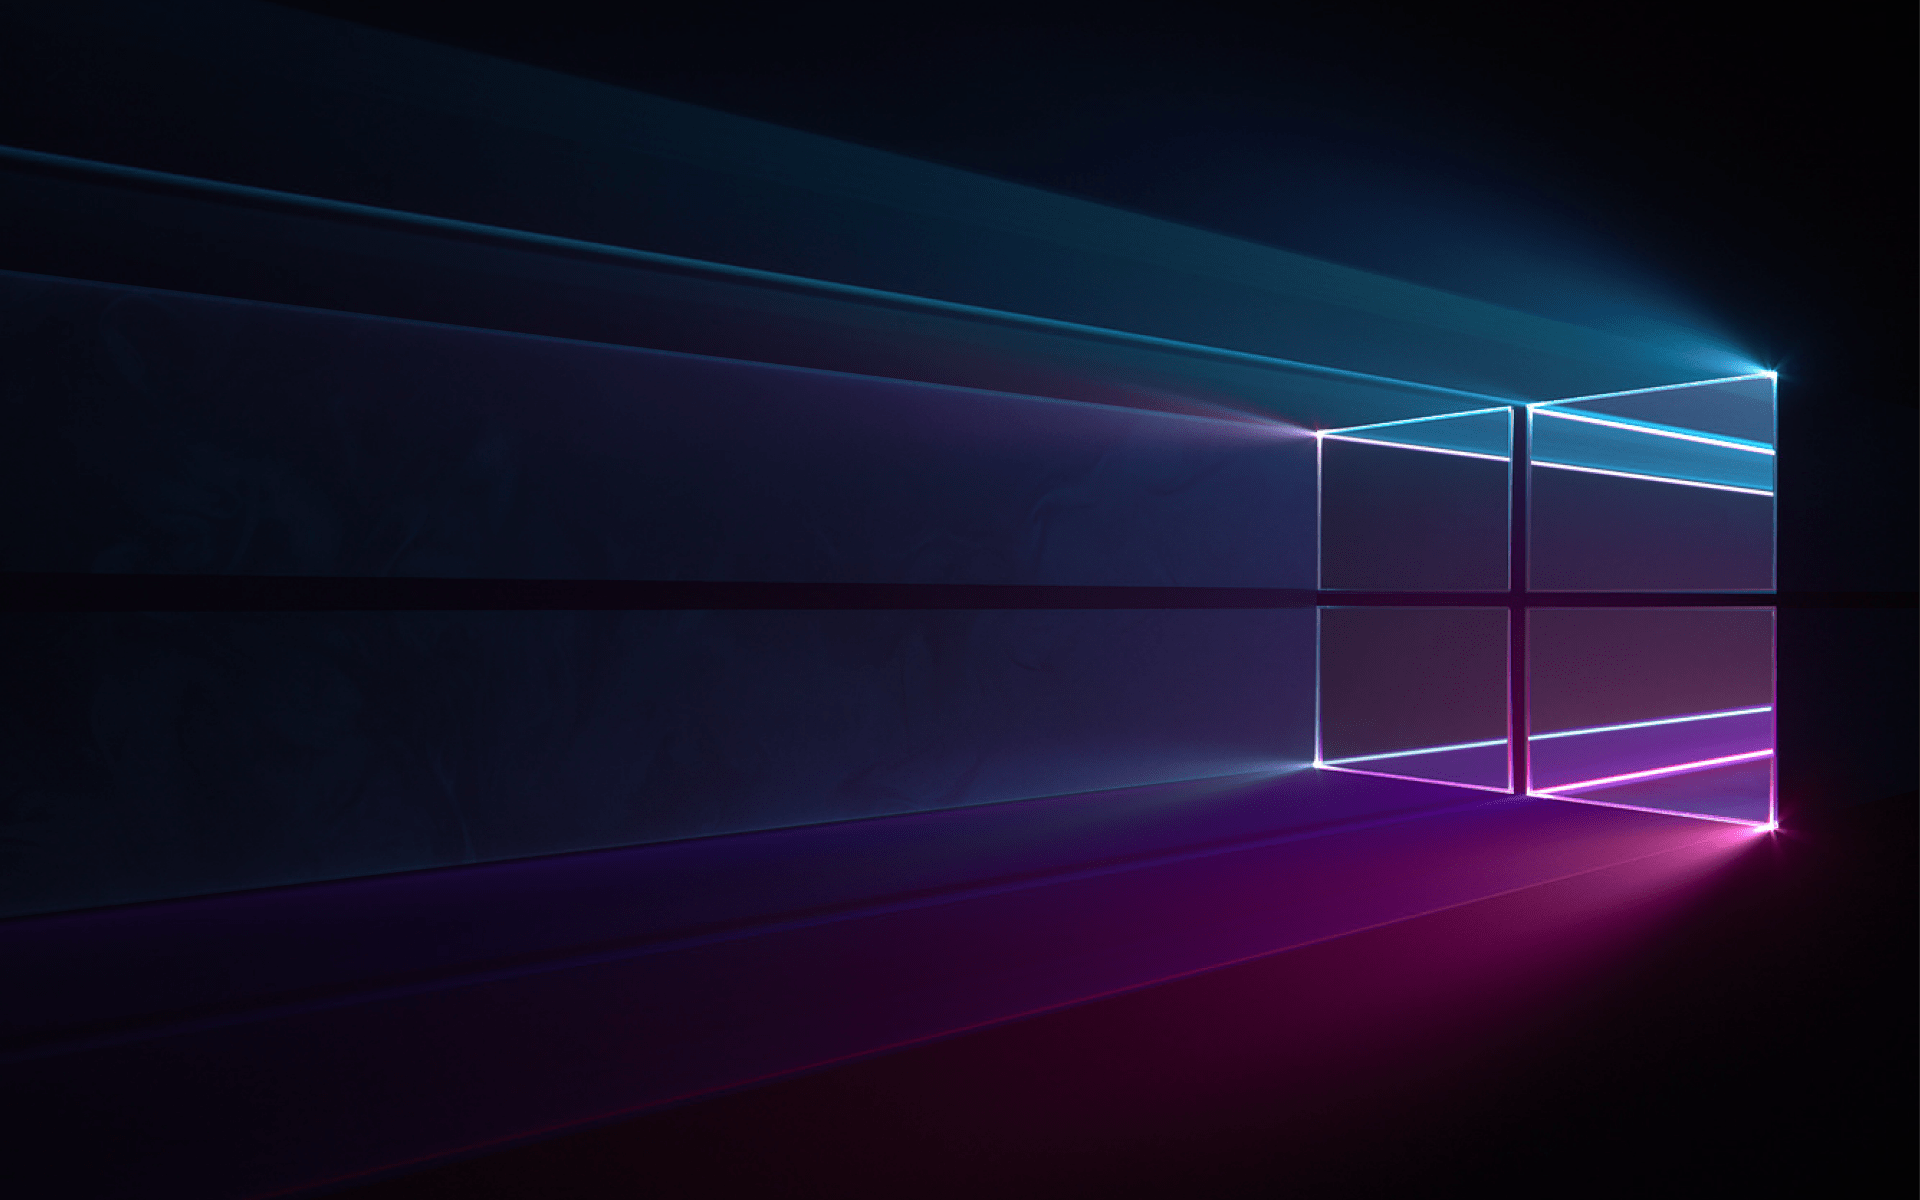 Windows 10 Pro Wallpapers - Top Free Windows 10 Pro Backgrounds